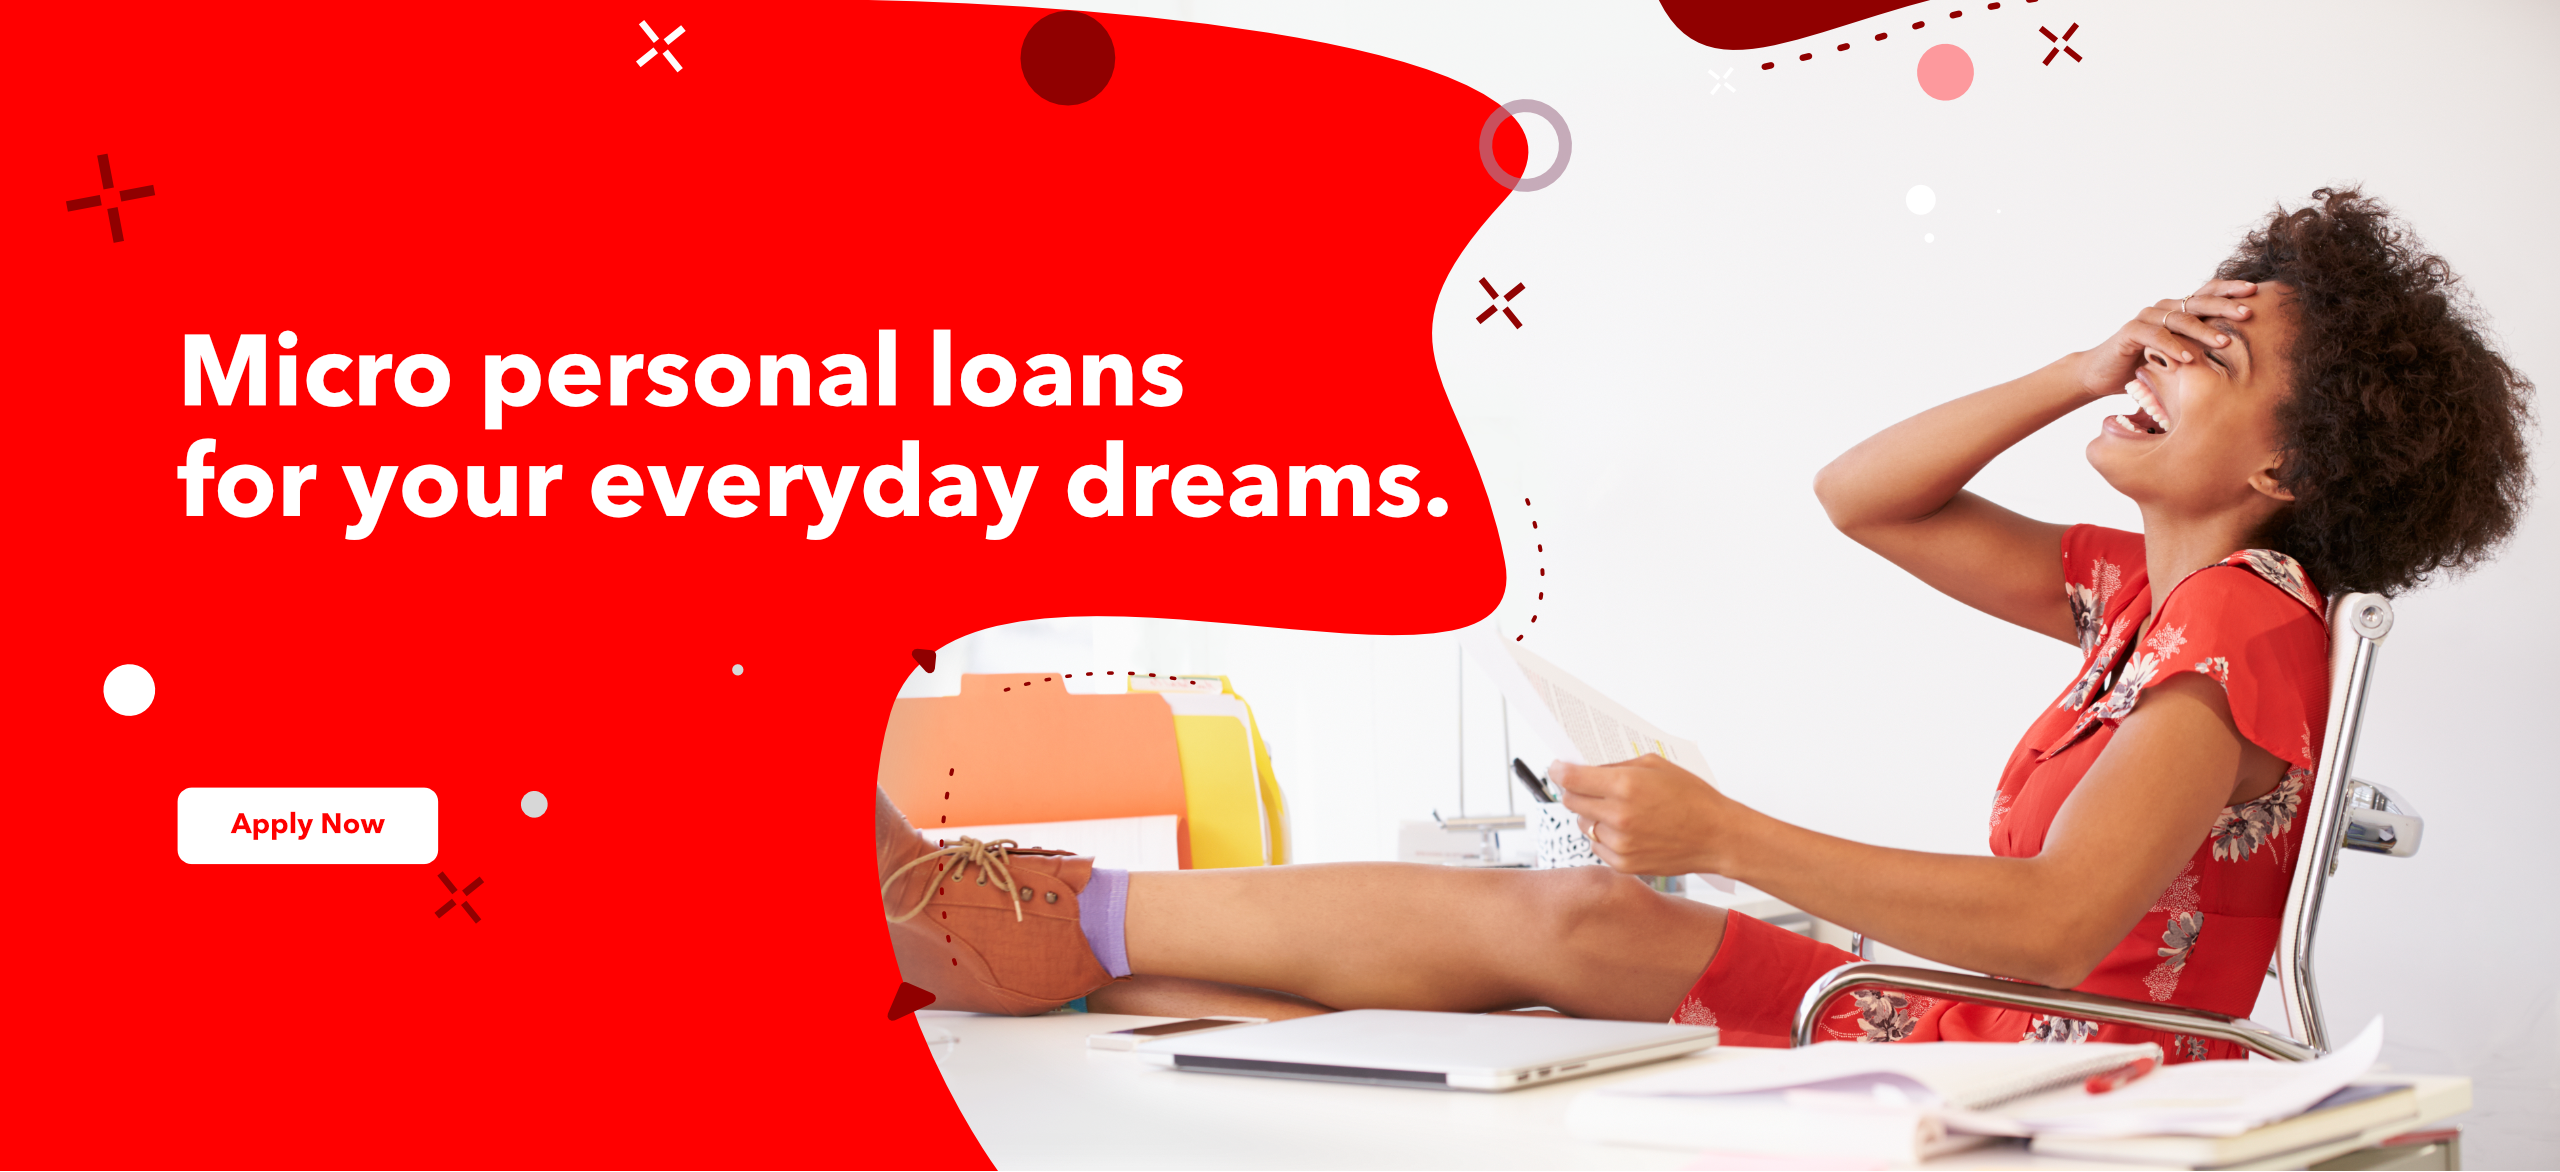 Micro personal loans for your everyday dreams.